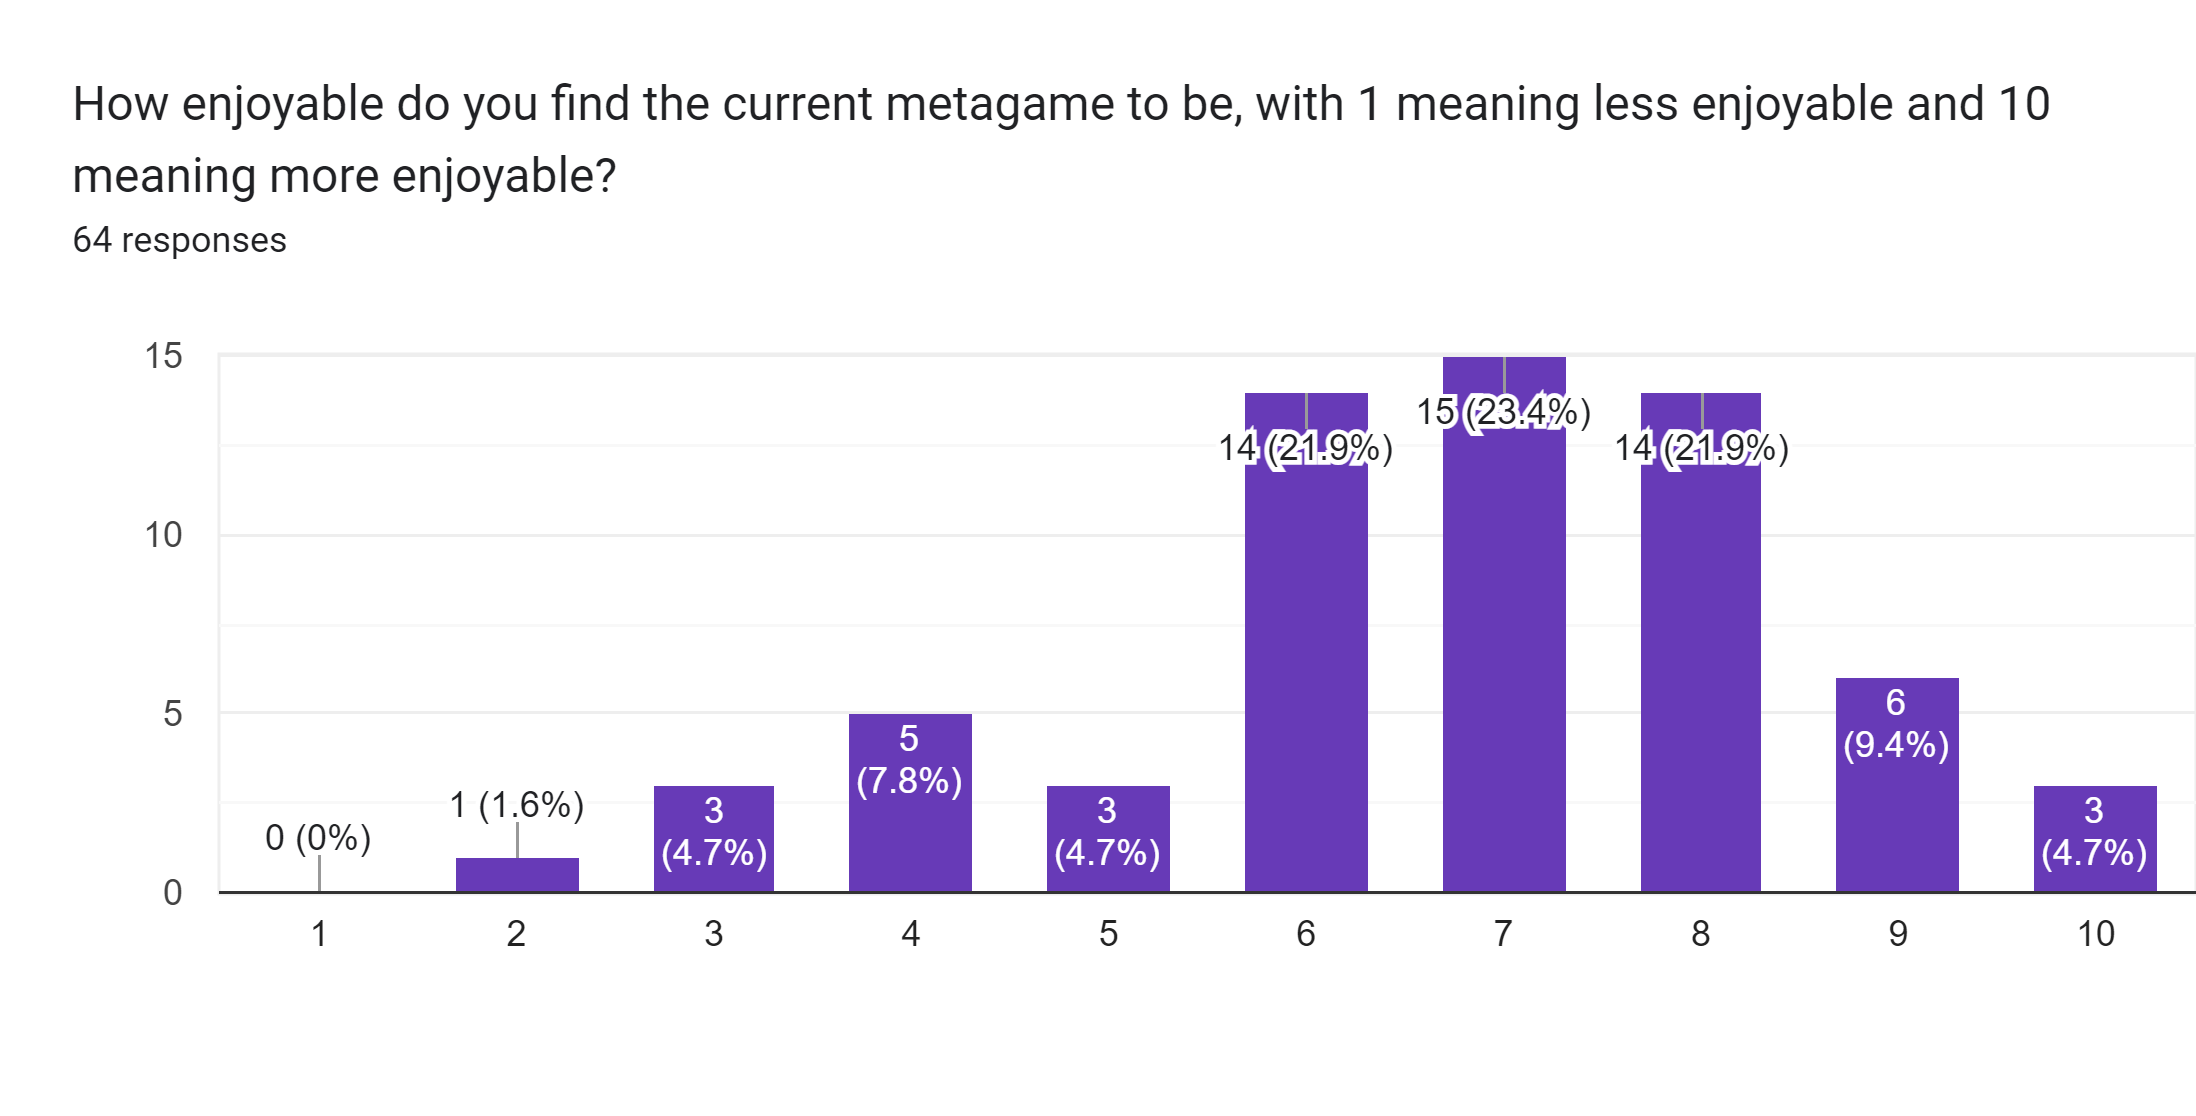 Forms response chart. Question title: How enjoyable do you find the current metagame to be, with 1 meaning less enjoyable and 10 meaning more enjoyable?. Number of responses: 64 responses.